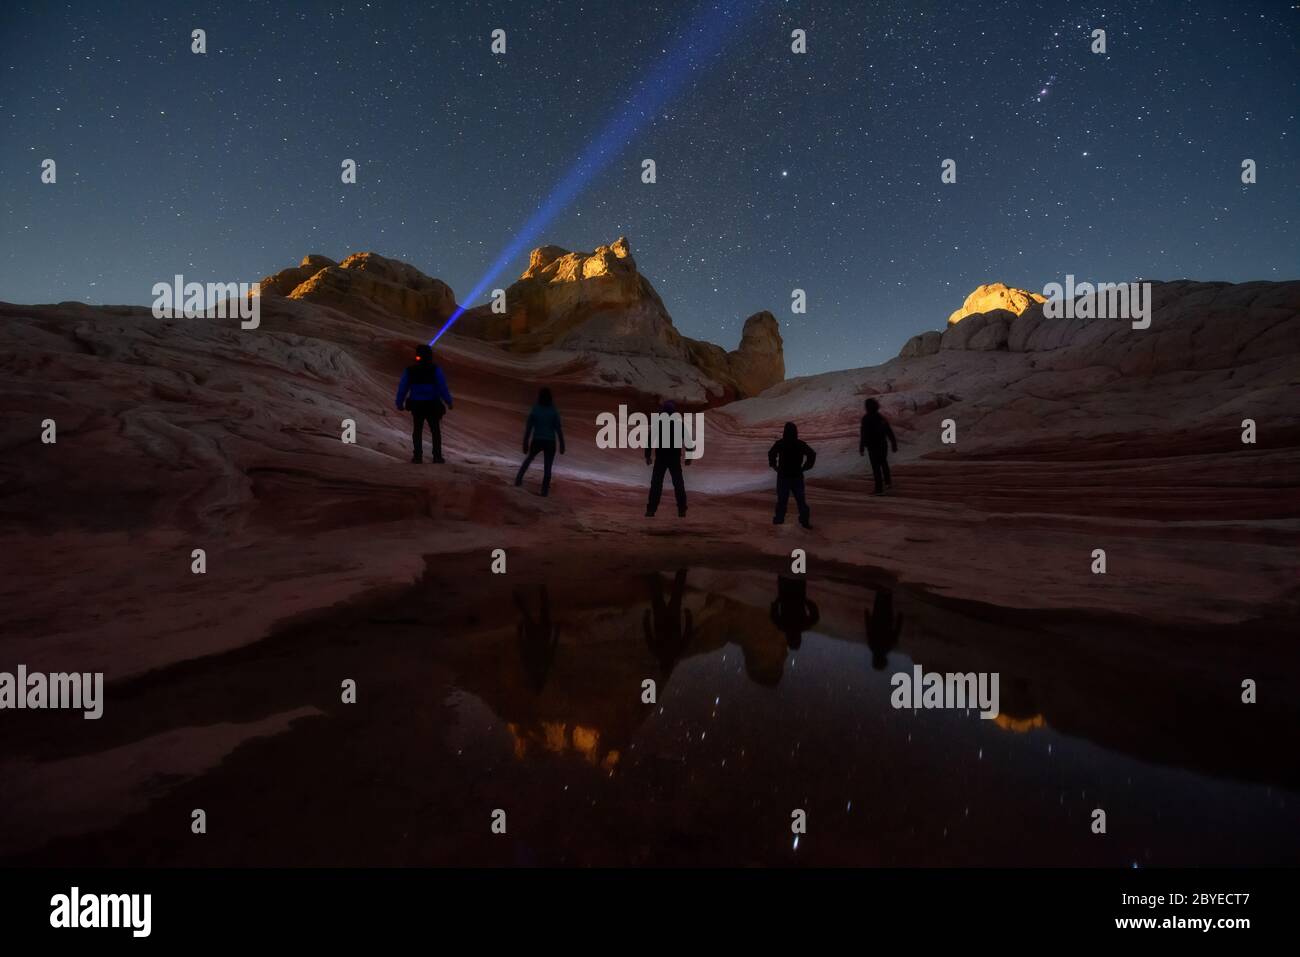 Group of stargazers posting under the night sky full of stars at White Pocket, remote area in Arizona desert. Inspring travel and adventure theme. Stock Photo